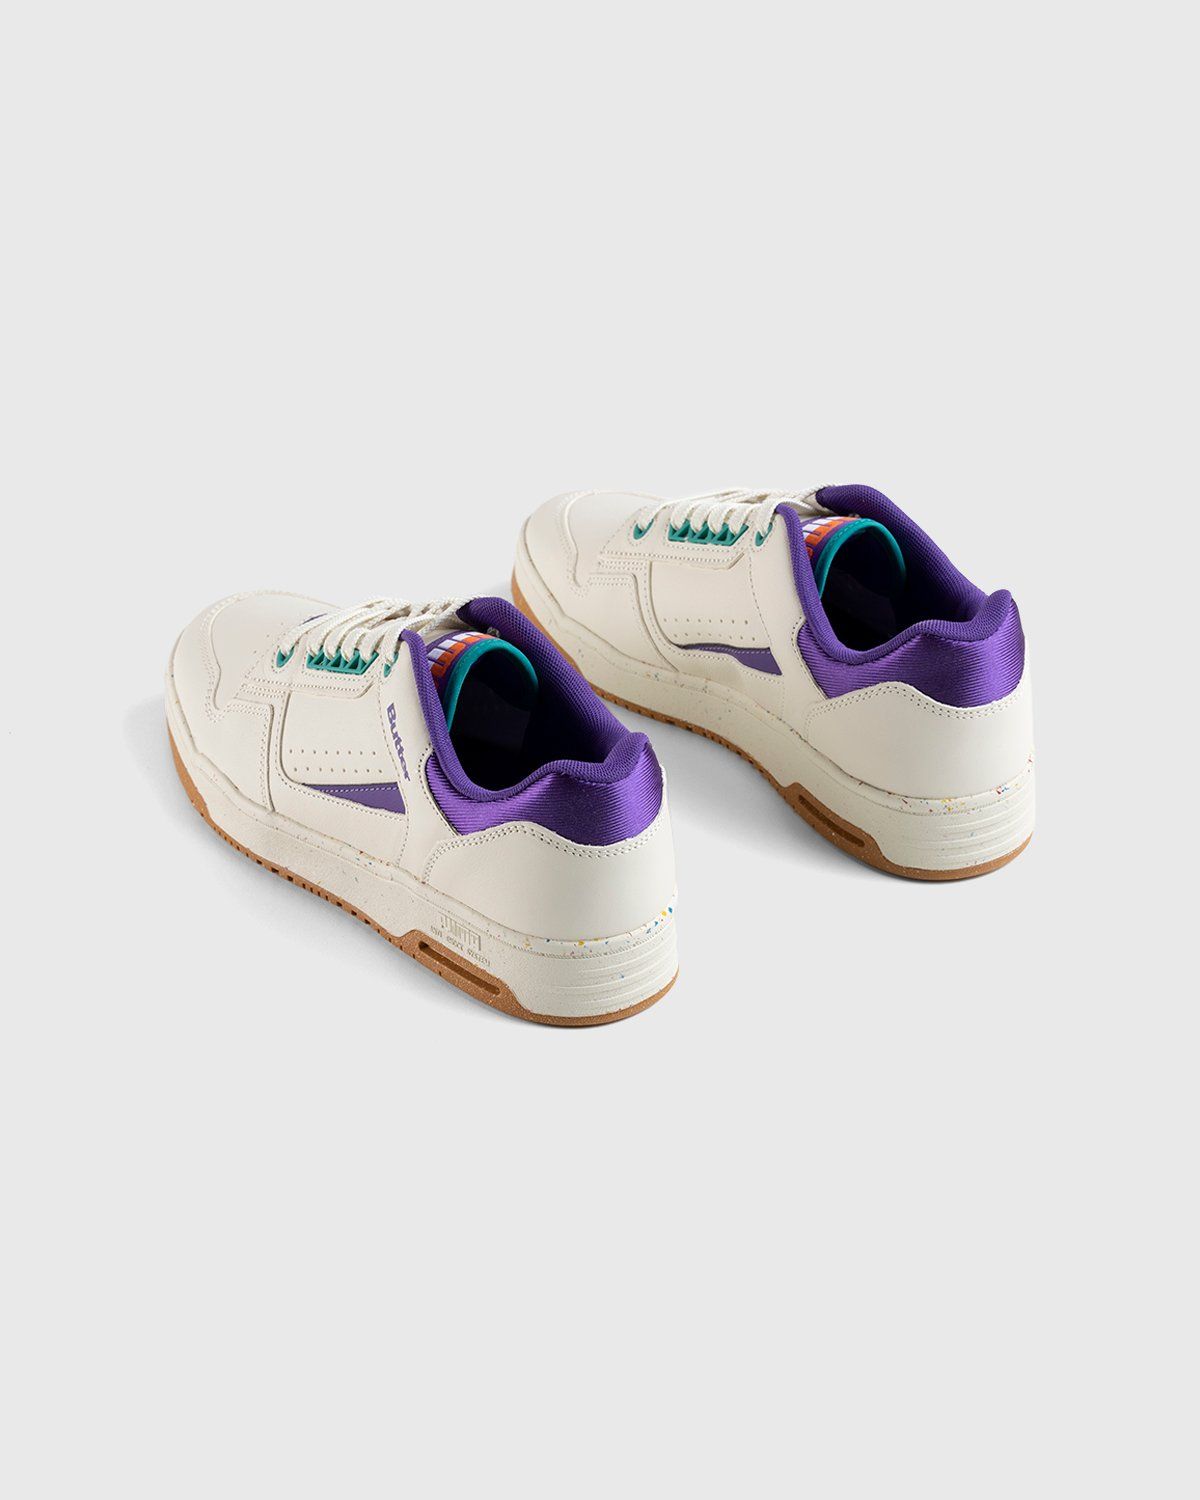 Puma x Butter Goods – Slipstream Lo Whisper White/Prism Violet/Navigate - Low Top Sneakers - Black - Image 4